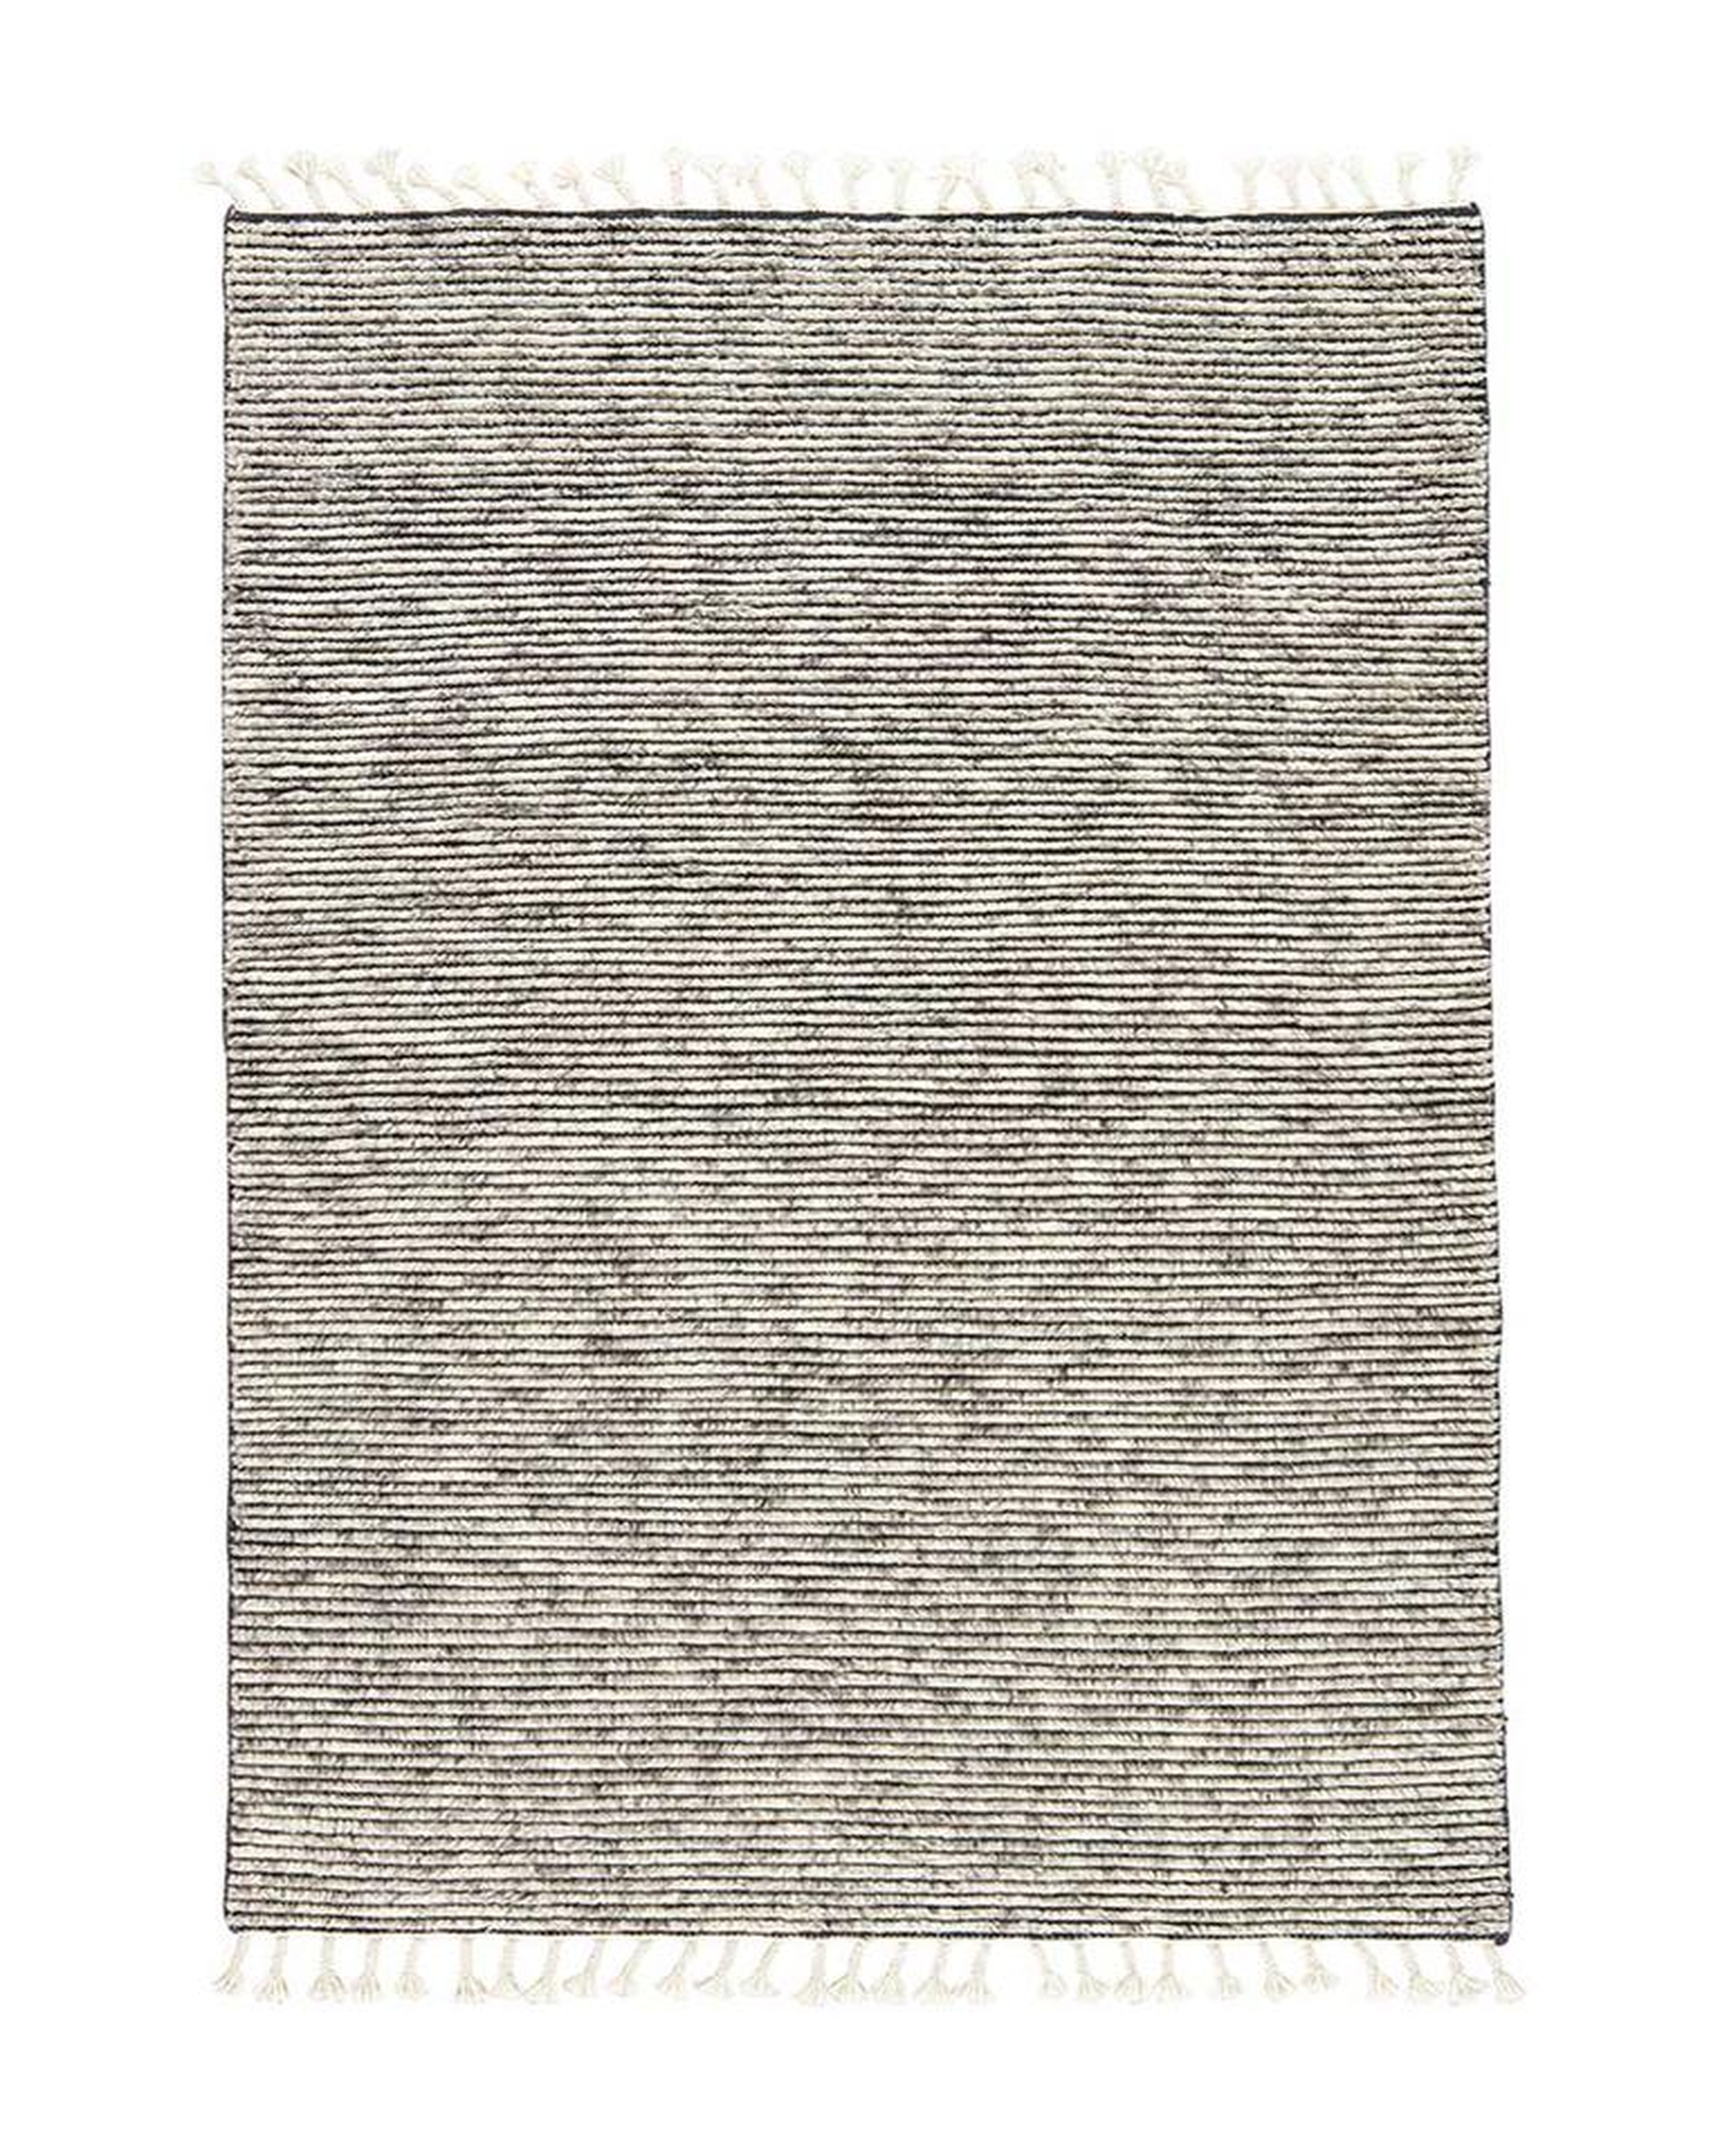 BUENOS AIRES HAND-KNOTTED WOOL RUG, 9' x 13' - McGee & Co.